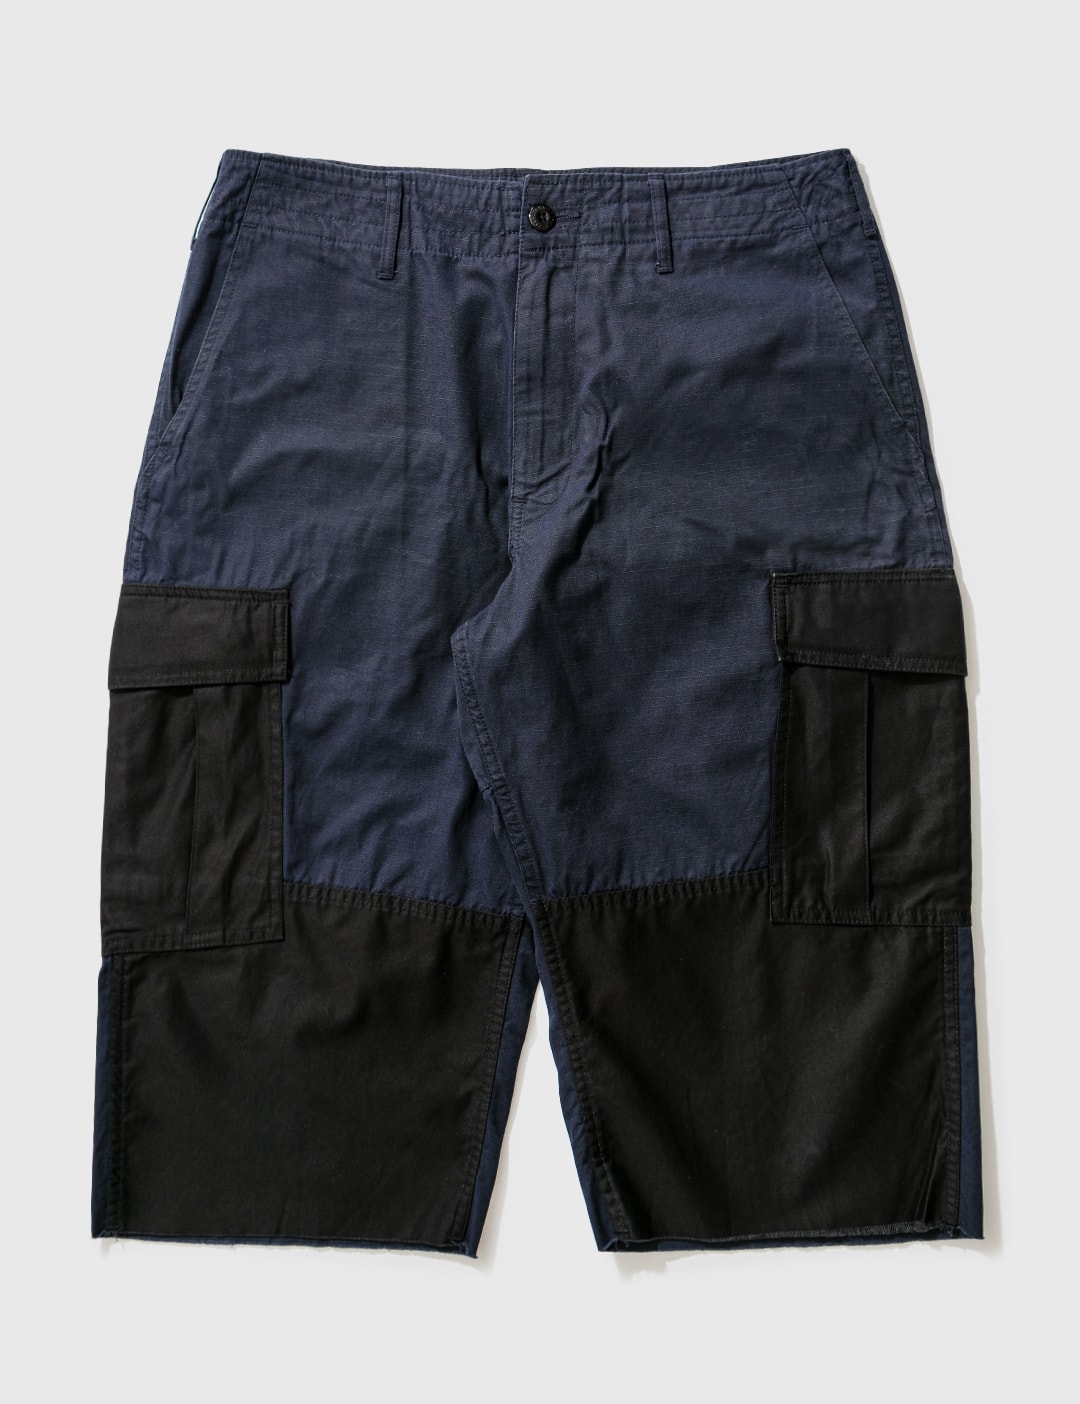 Wtaps Navy with Black pockets Shorts Placeholder Image